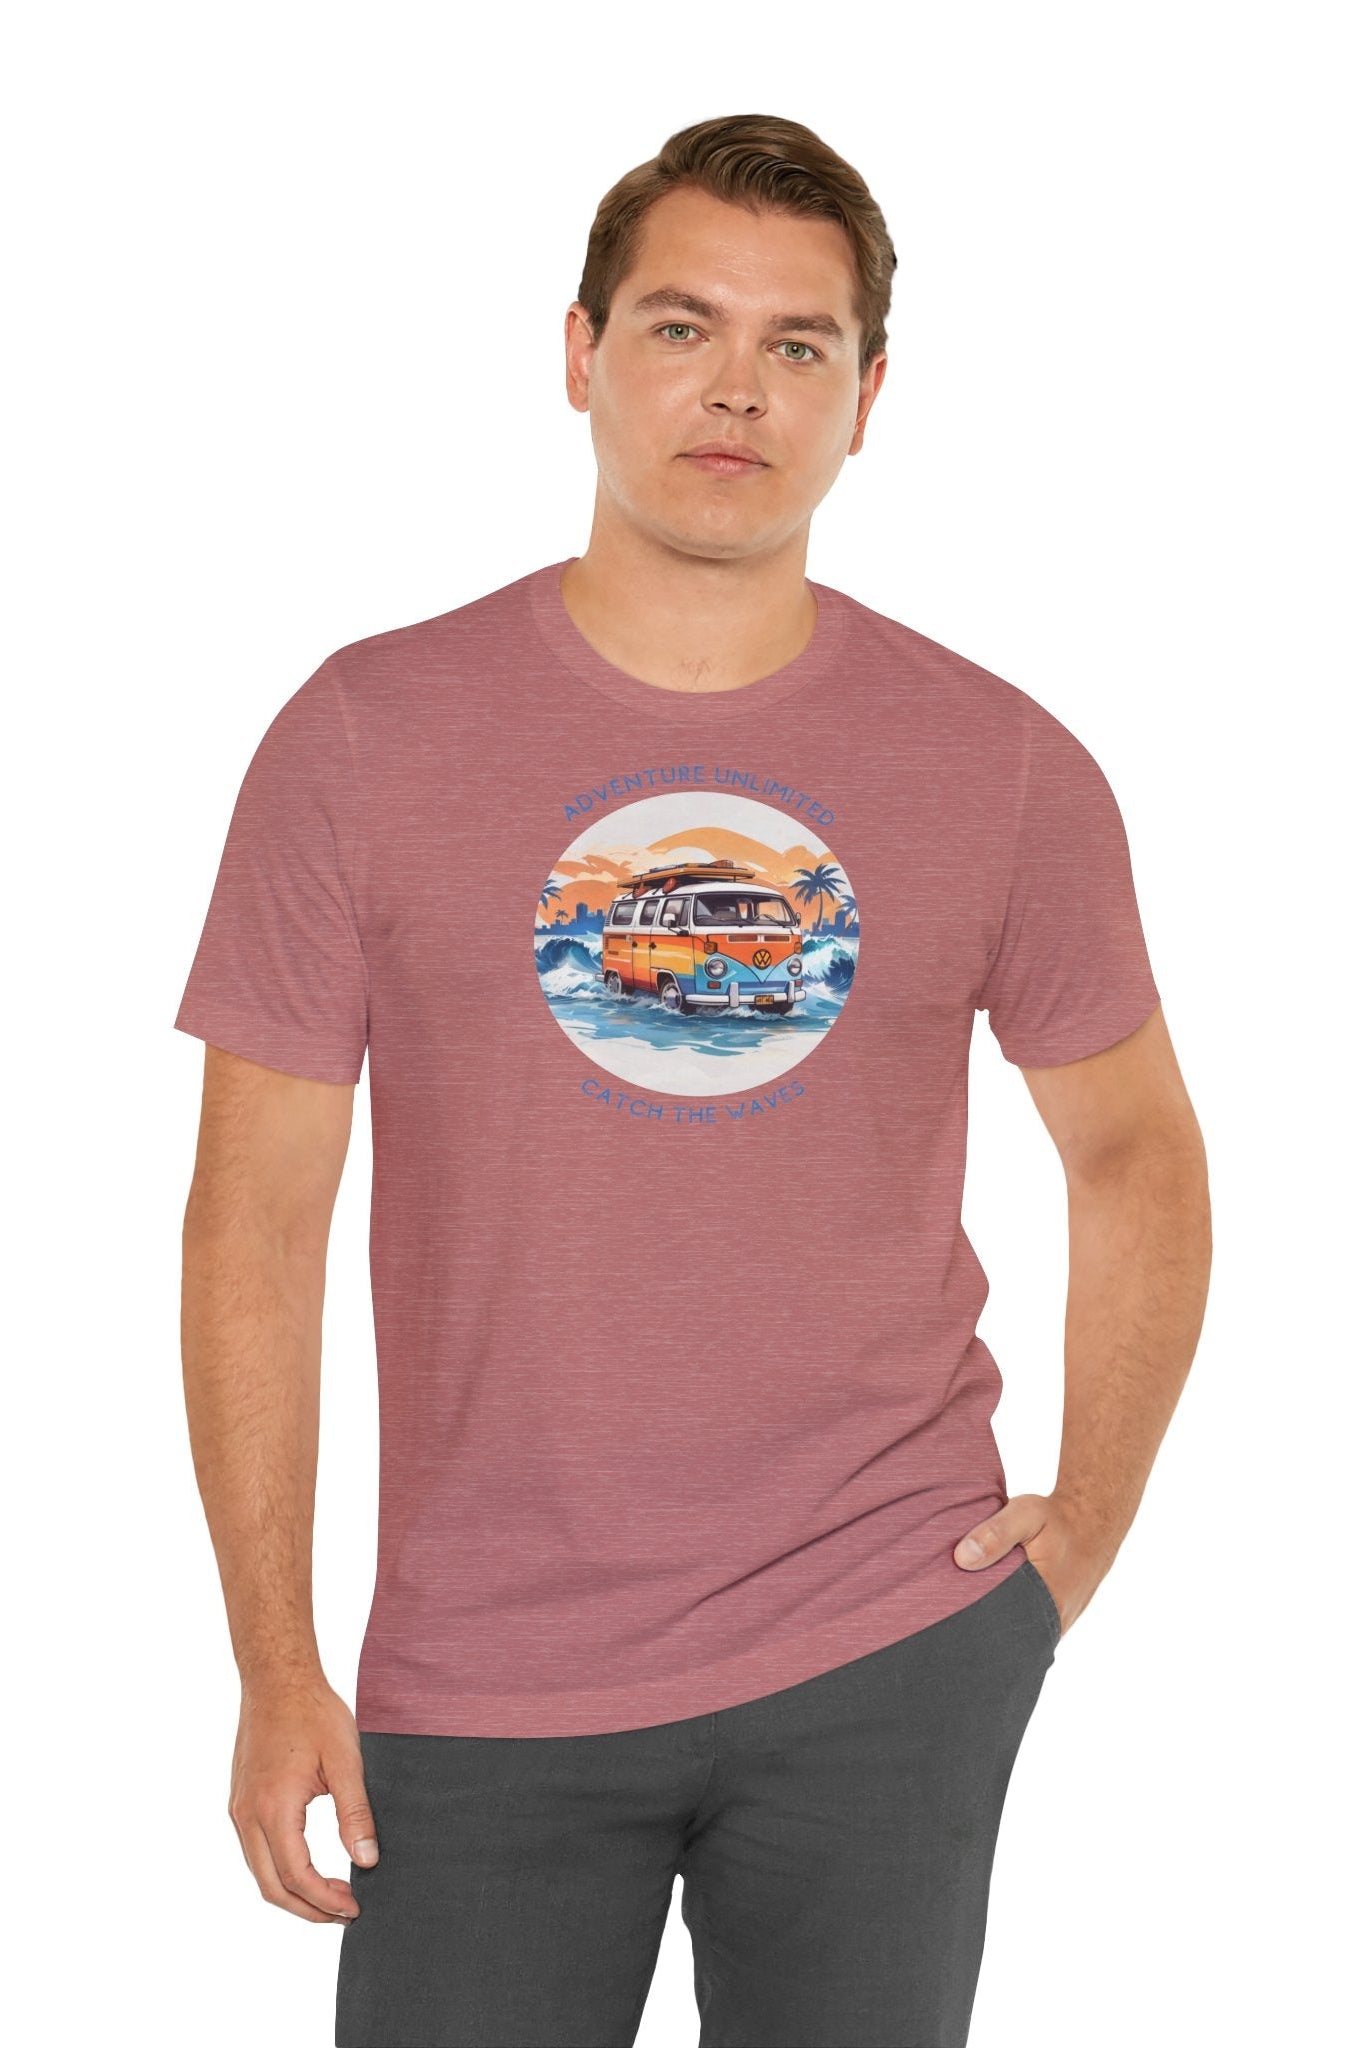 Man in maroon surfboard-printed tee with sunset background - Adventure Unlimited Direct-to-Garment Printed T-Shirt